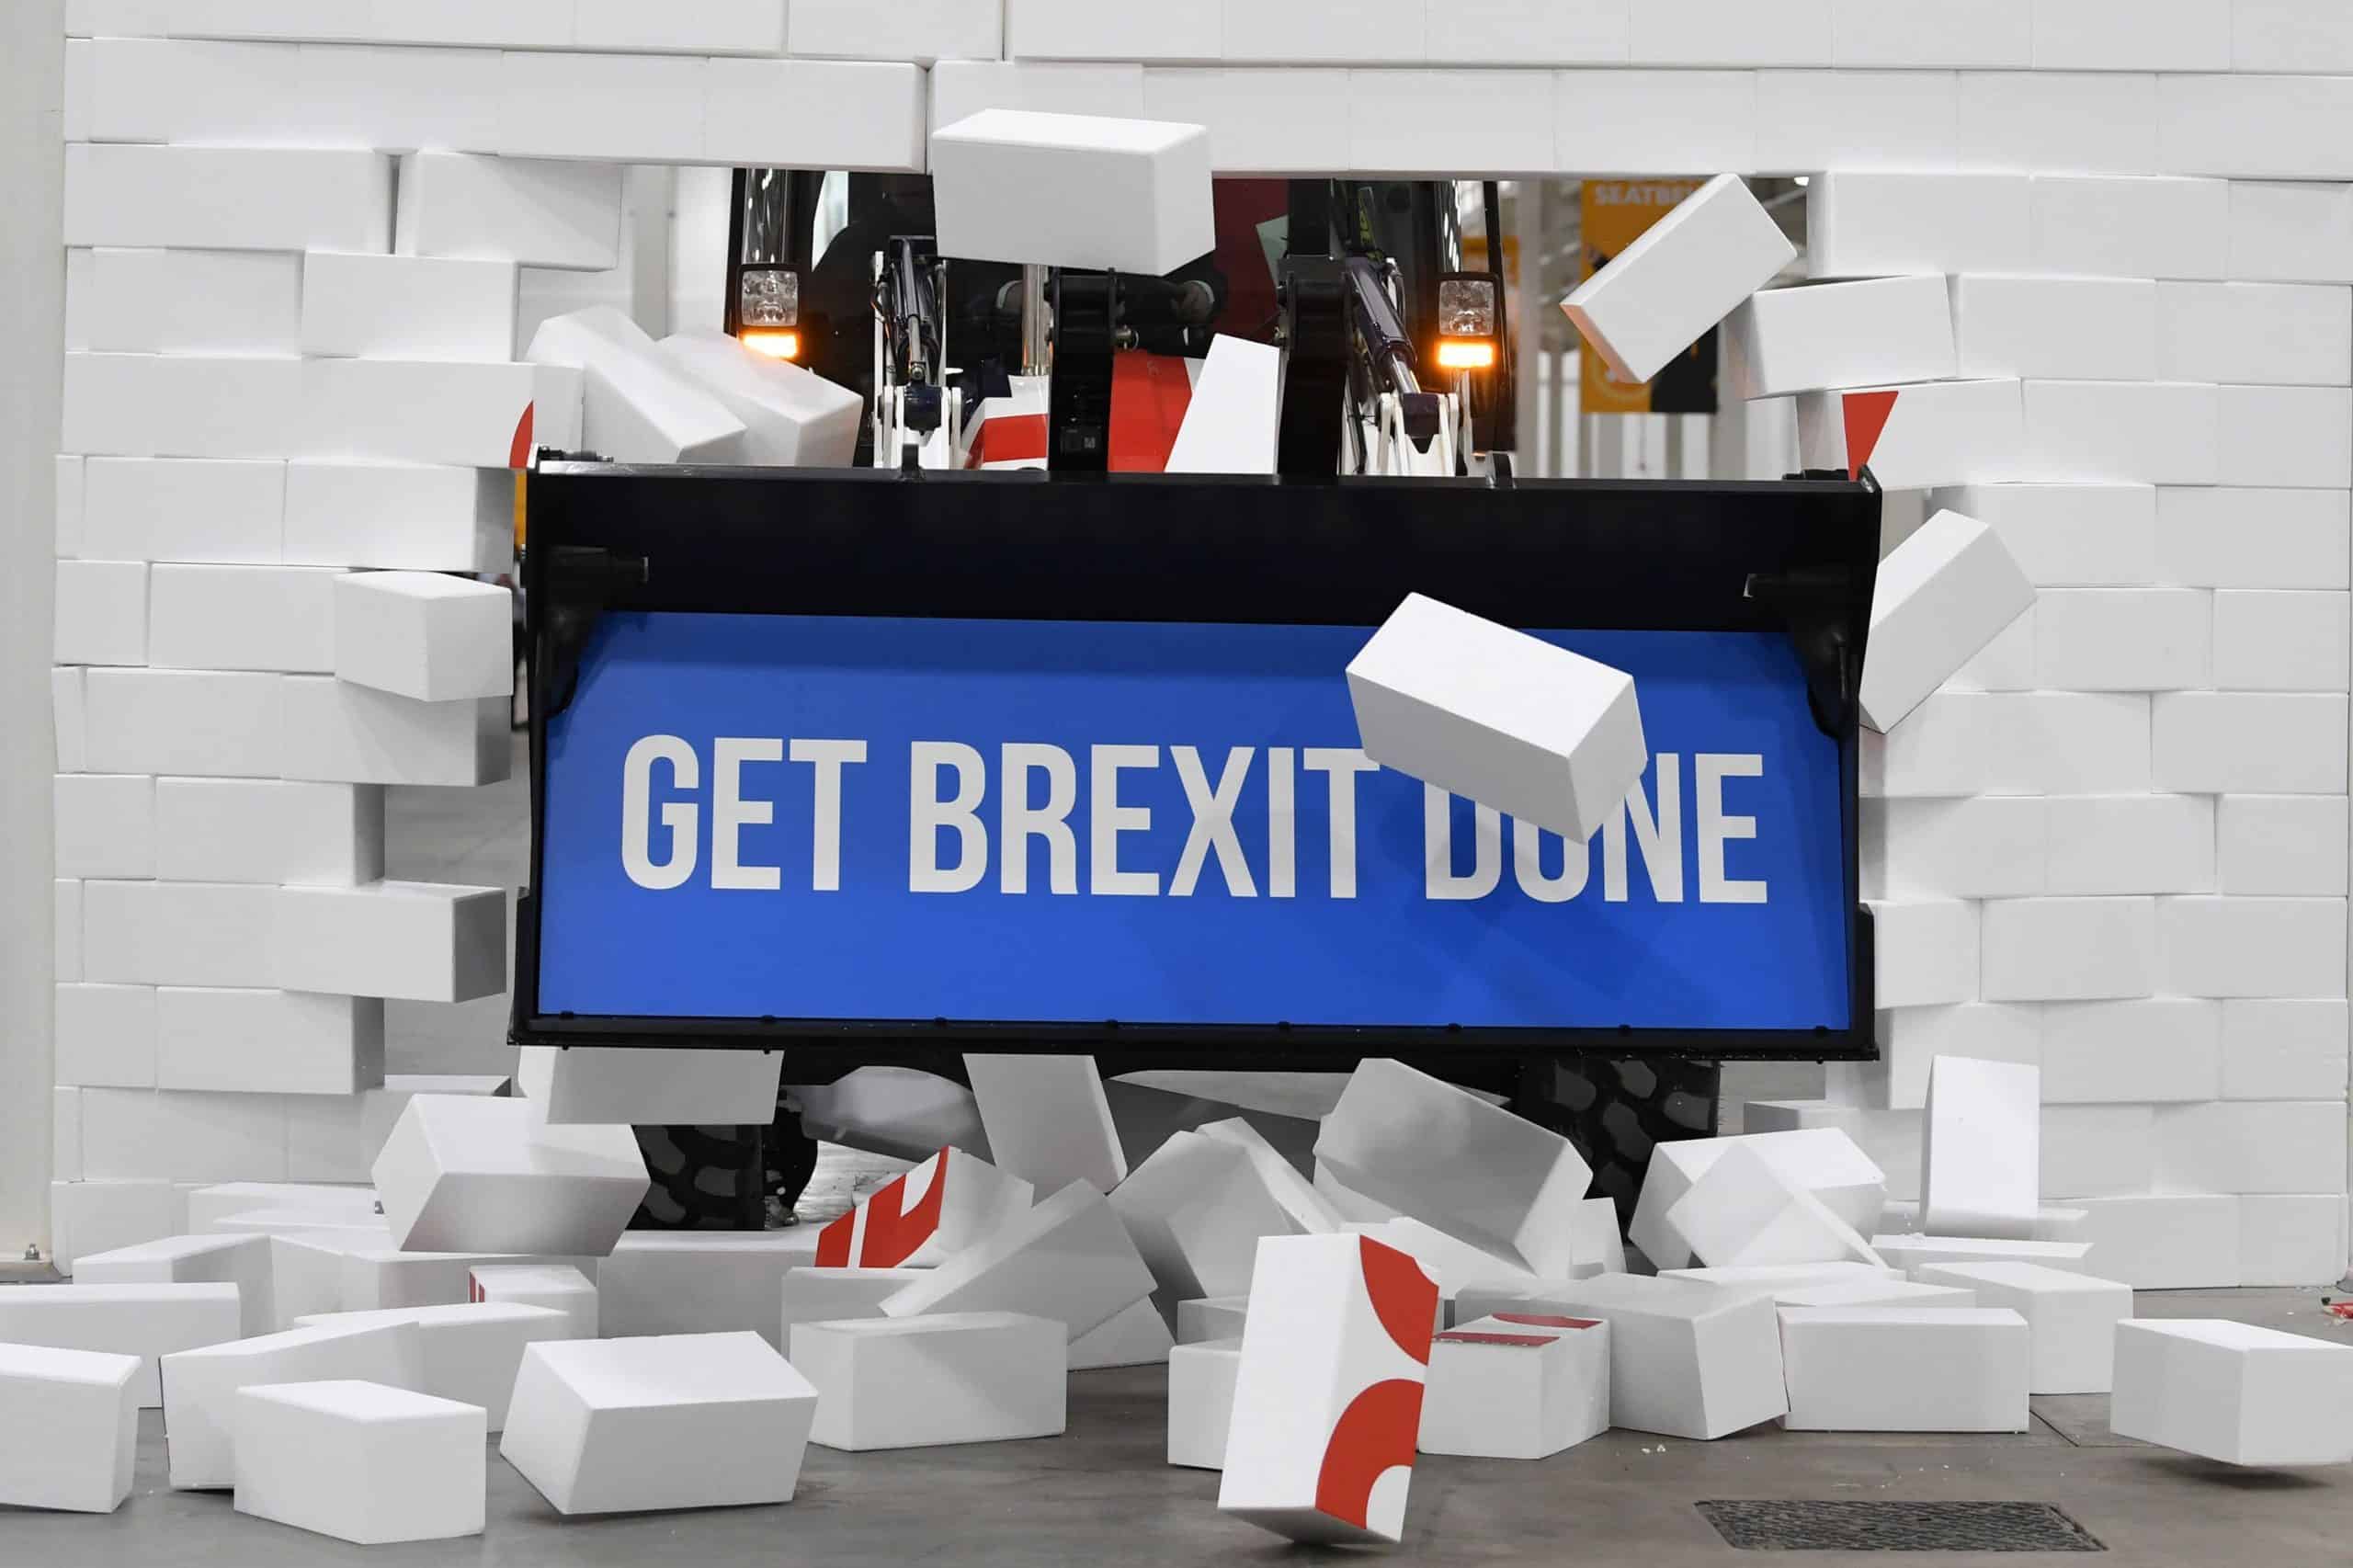 Brexiteers fundraising £1 million to fund ‘neutral’ Museum of Brexit